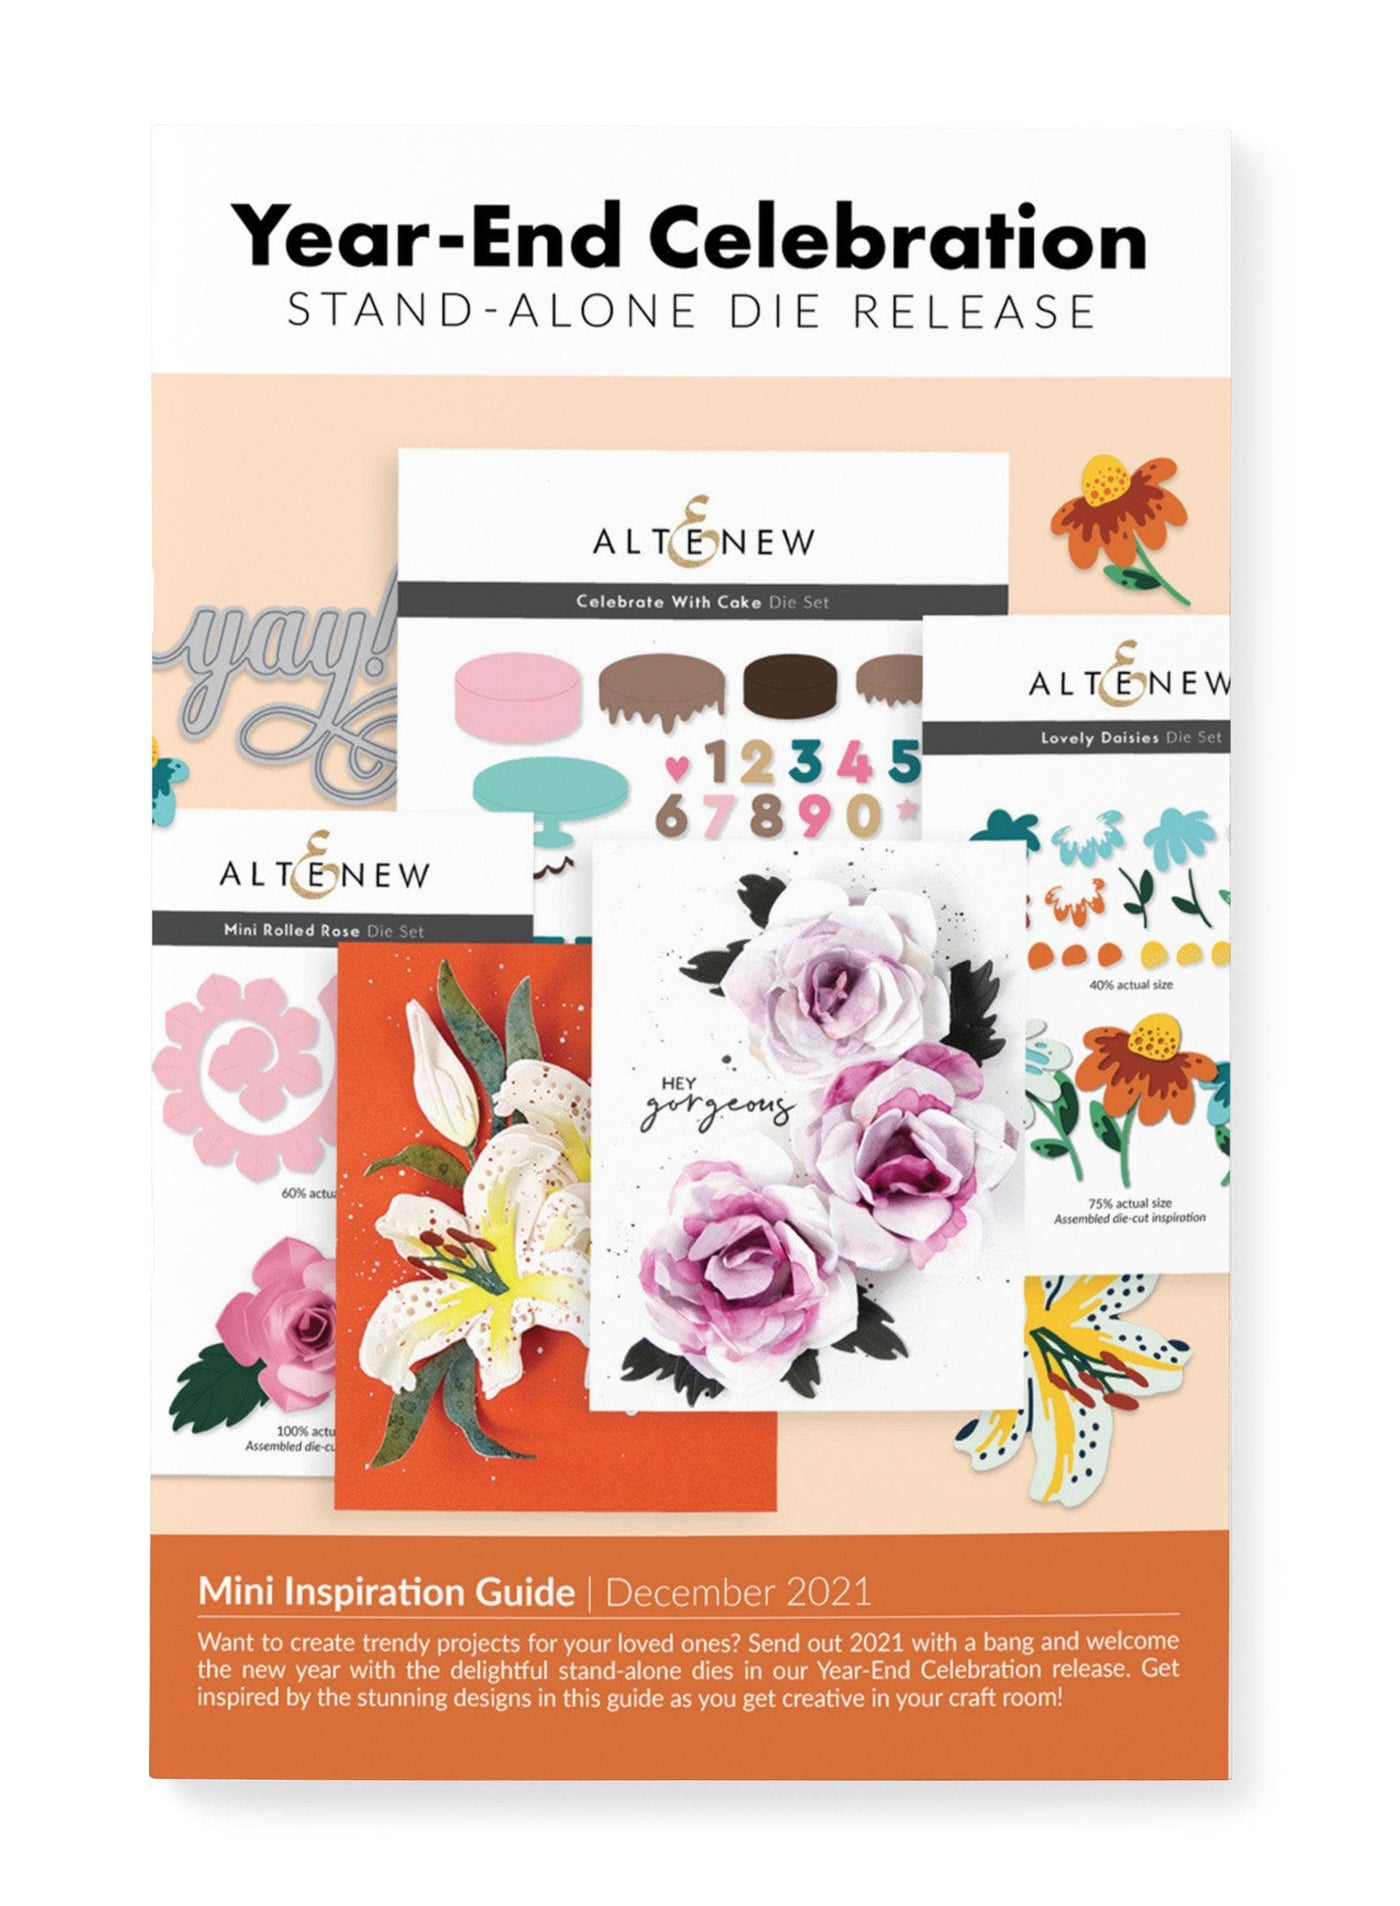 Printed Media Year-End Celebration Stand-alone Die Release Mini Inspiration Guide